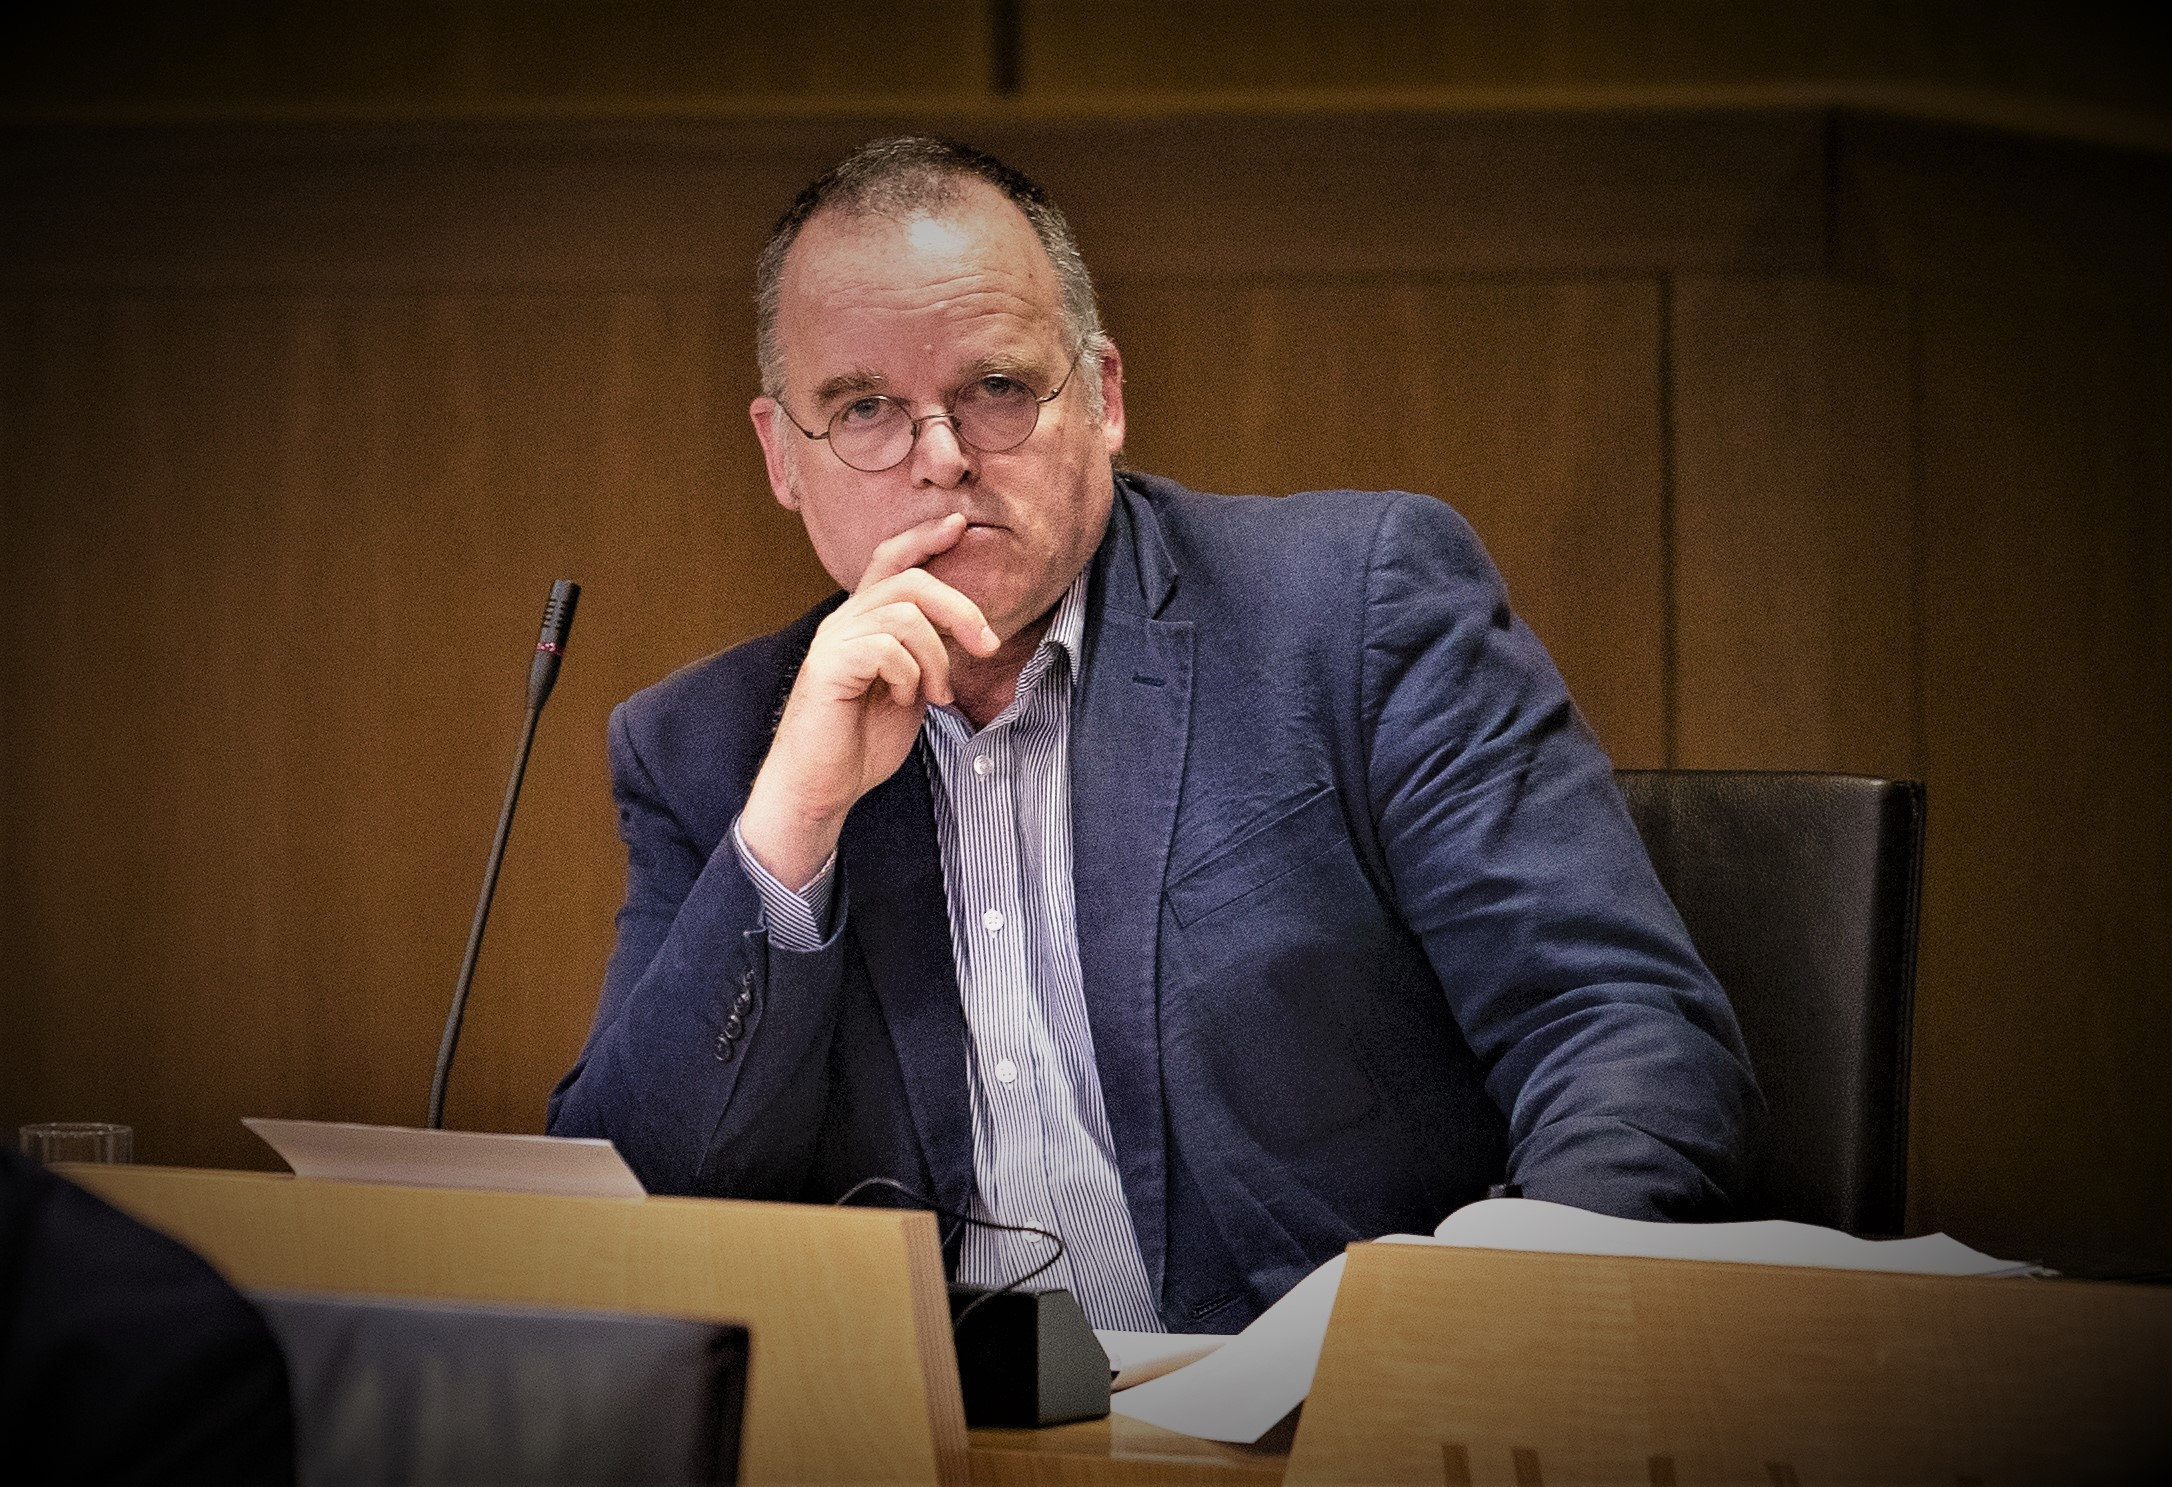 Independent MSP Andy Wightman in the main chamber of the Scottish Parliament, Edinburgh, during the debate on the motion of no confidence against First Minister Nicola Sturgeon. An investigation into the Scottish Governments unlawful handling of